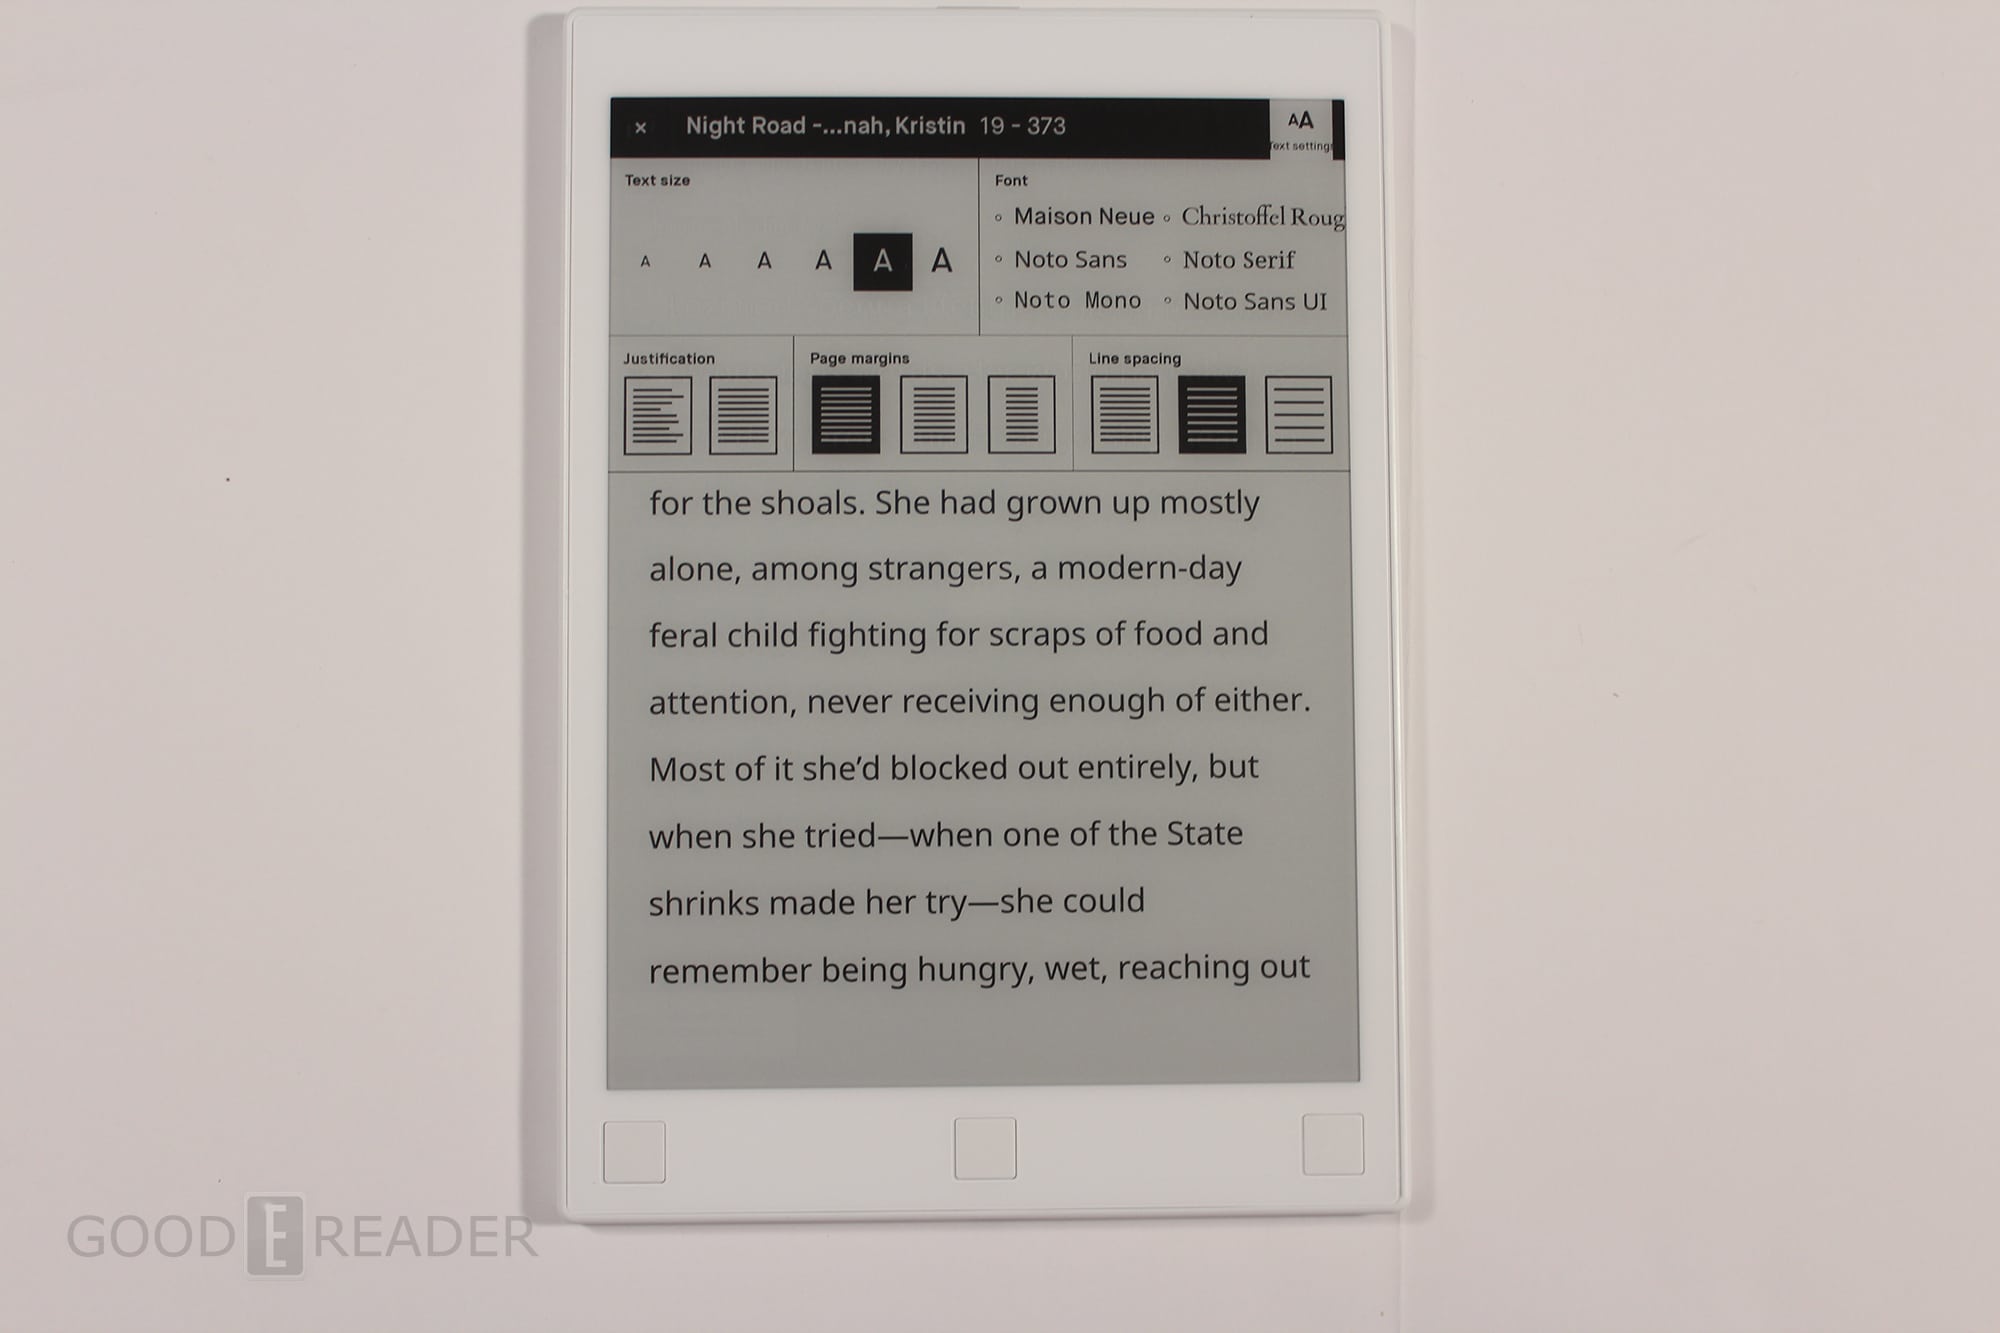 Remarkable has moved all of their writing tools in one menu - Good e-Reader